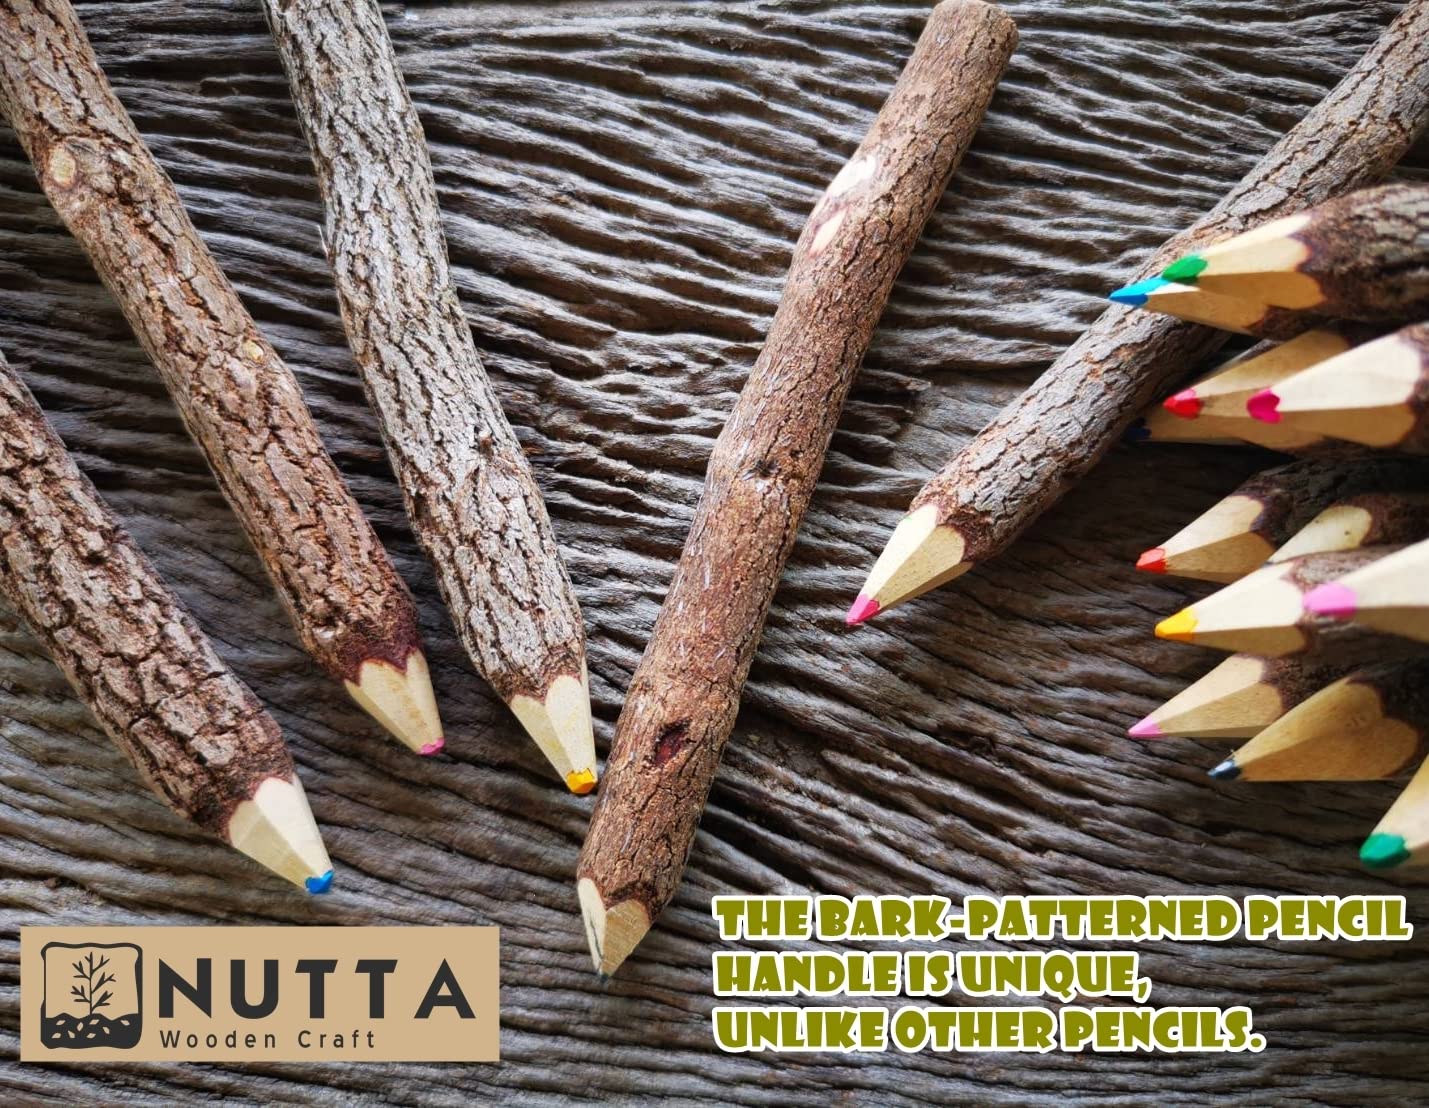 NUTTA - ASSORT COLORED, Branch & Twig Pencil, 12-PCs, Natural Wooden Pencils Wood Tree Rustic Twig Pencils Fun Pencil for Children and Family Wooden